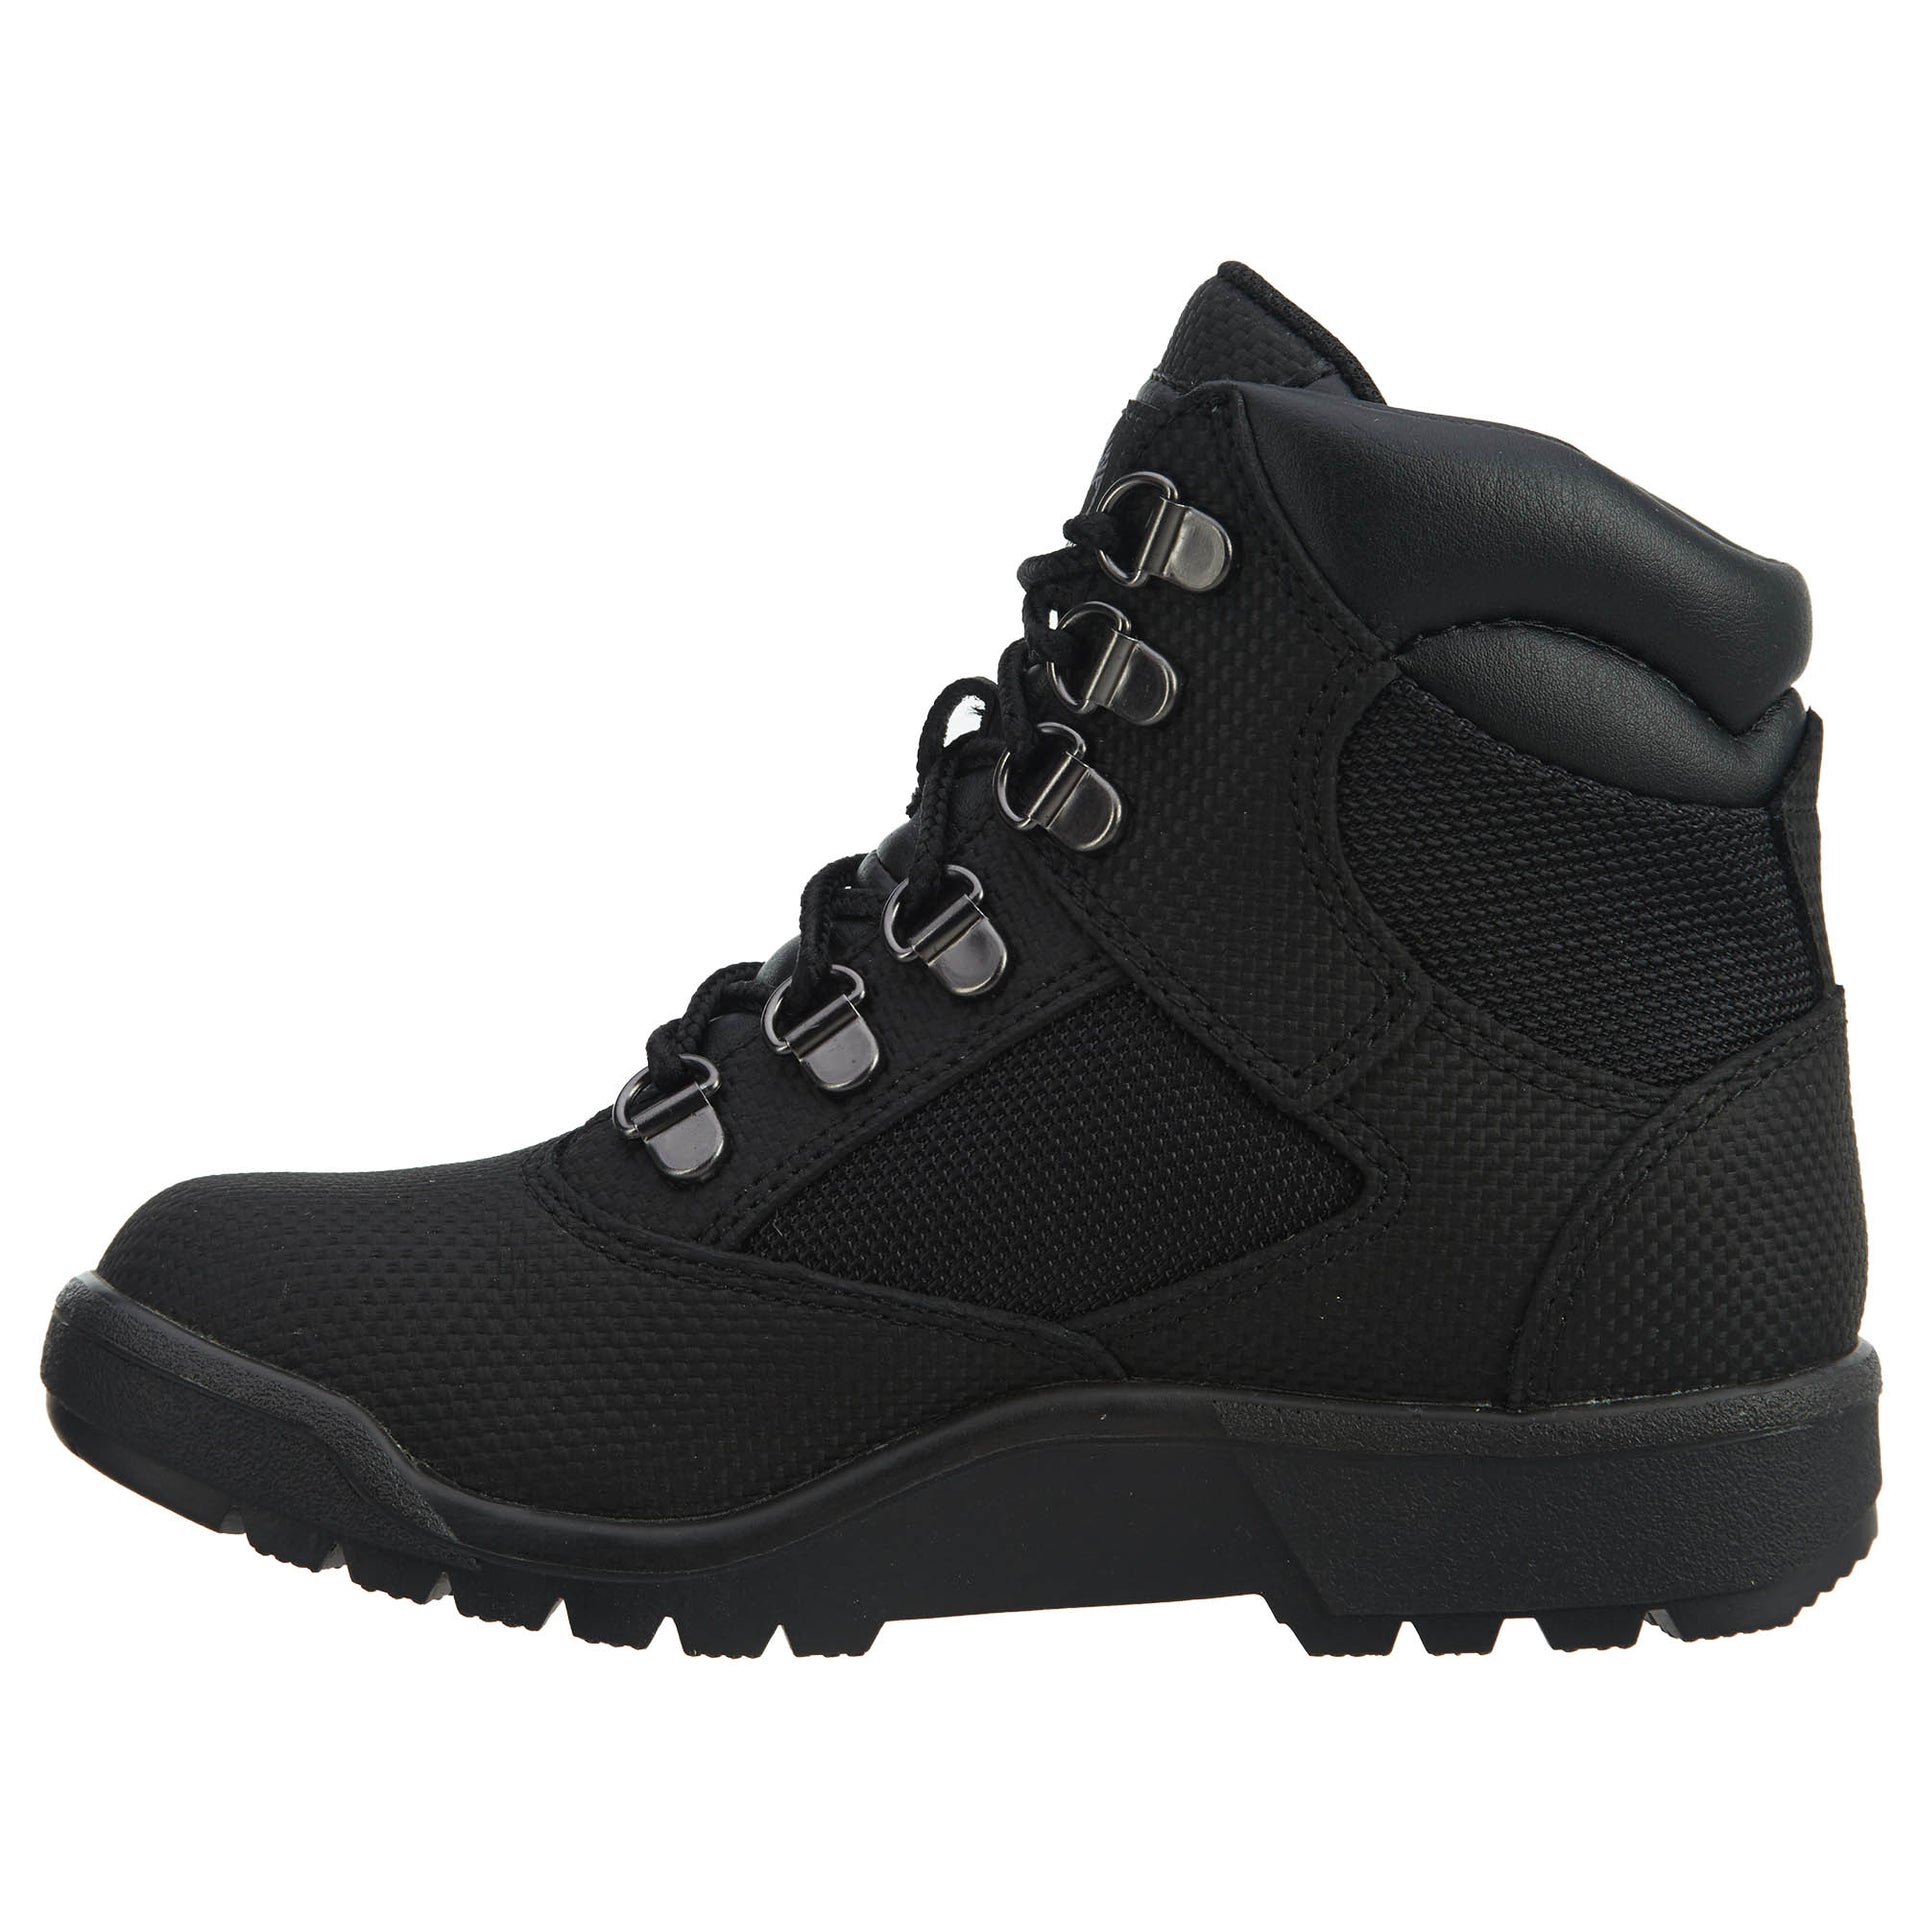 Timberland 6" Field Boots Helcor Little Kids Style : Tb0a1ata